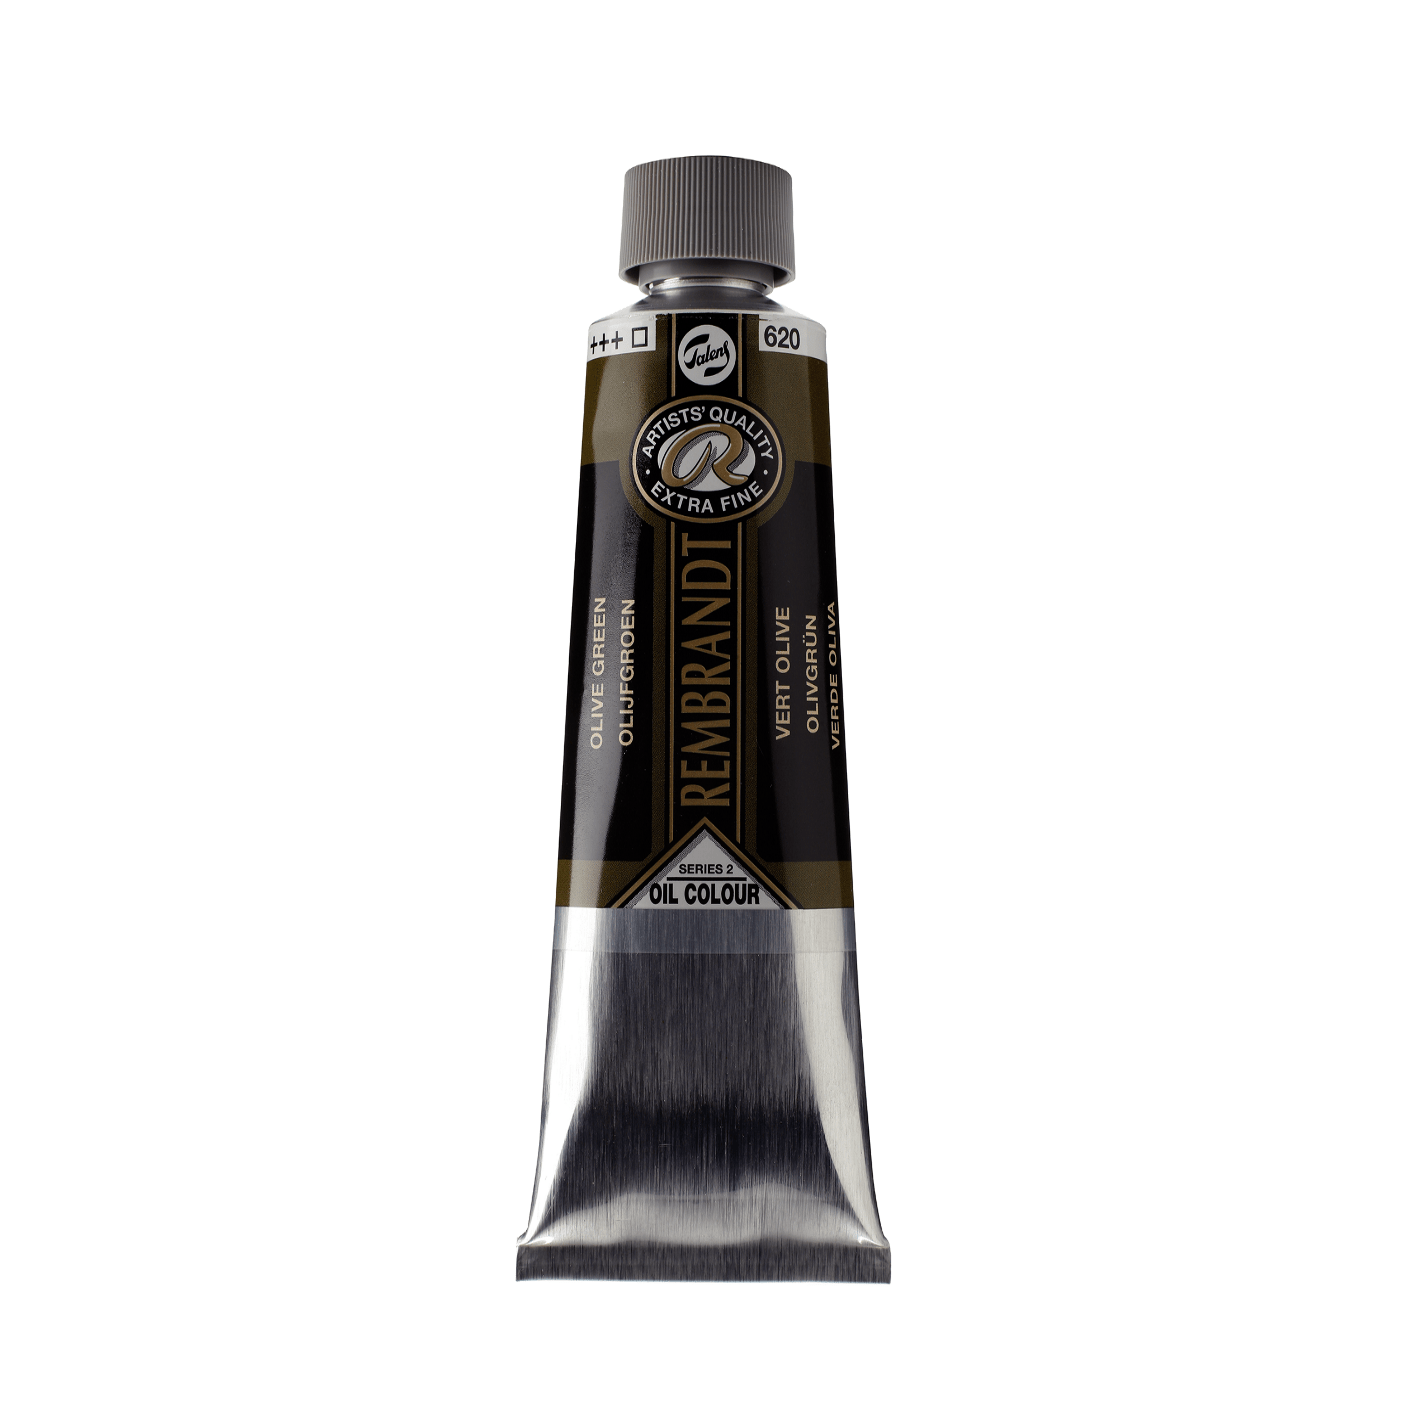 Rembrandt Oliemaling 150ml Olive Green